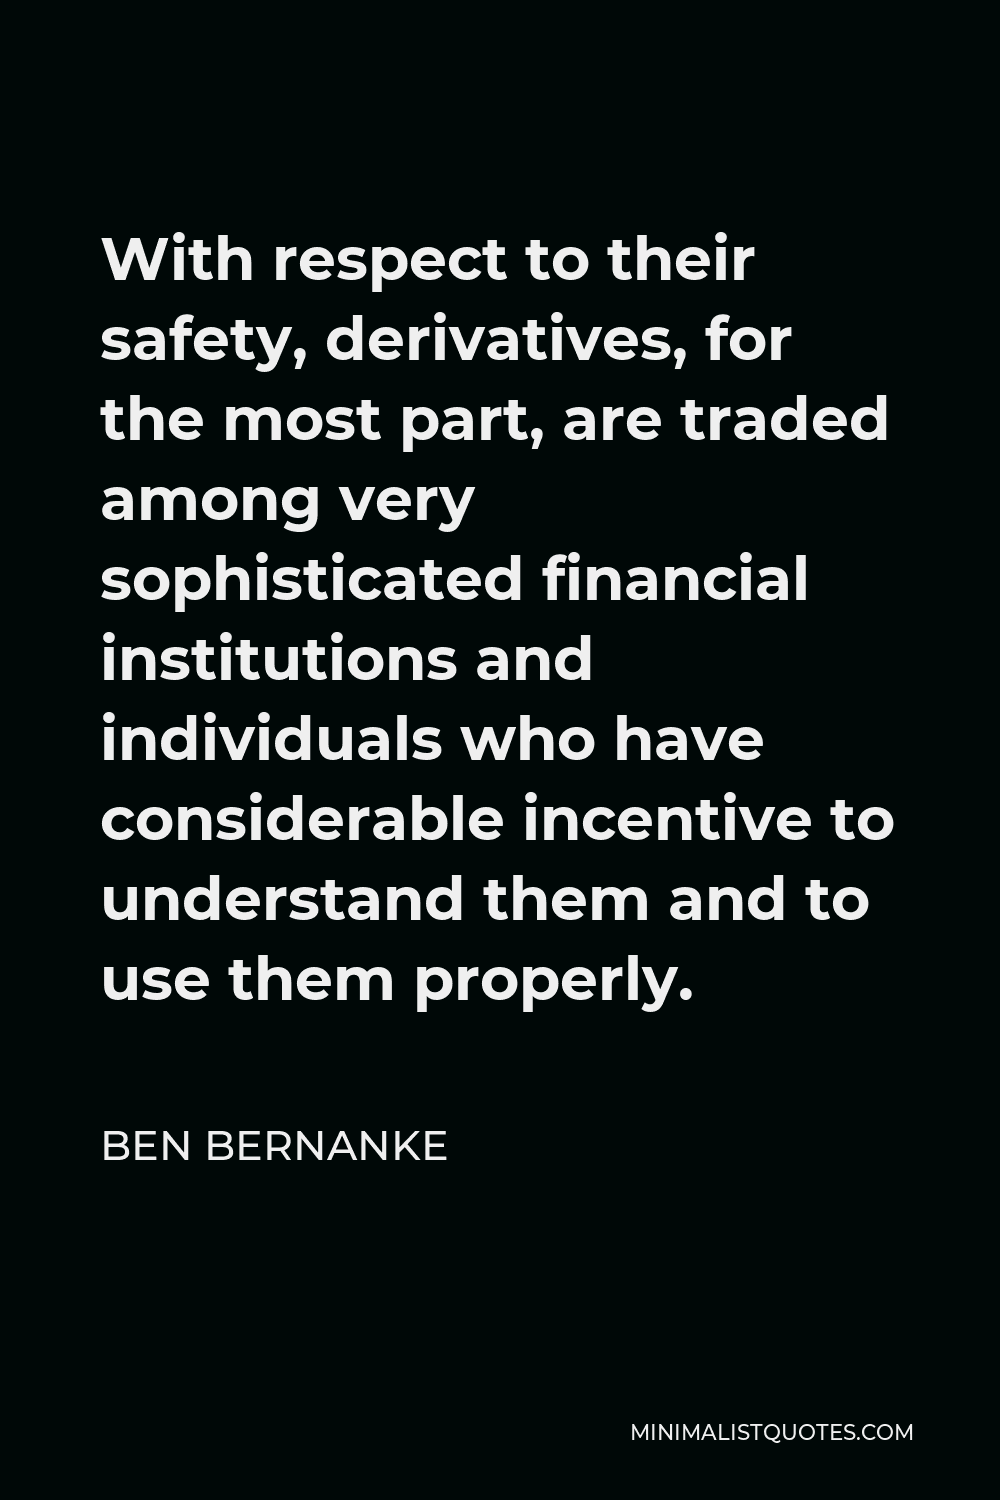 Ben Bernanke Quote - With respect to their safety, derivatives, for the most part, are traded among very sophisticated financial institutions and individuals who have considerable incentive to understand them and to use them properly.